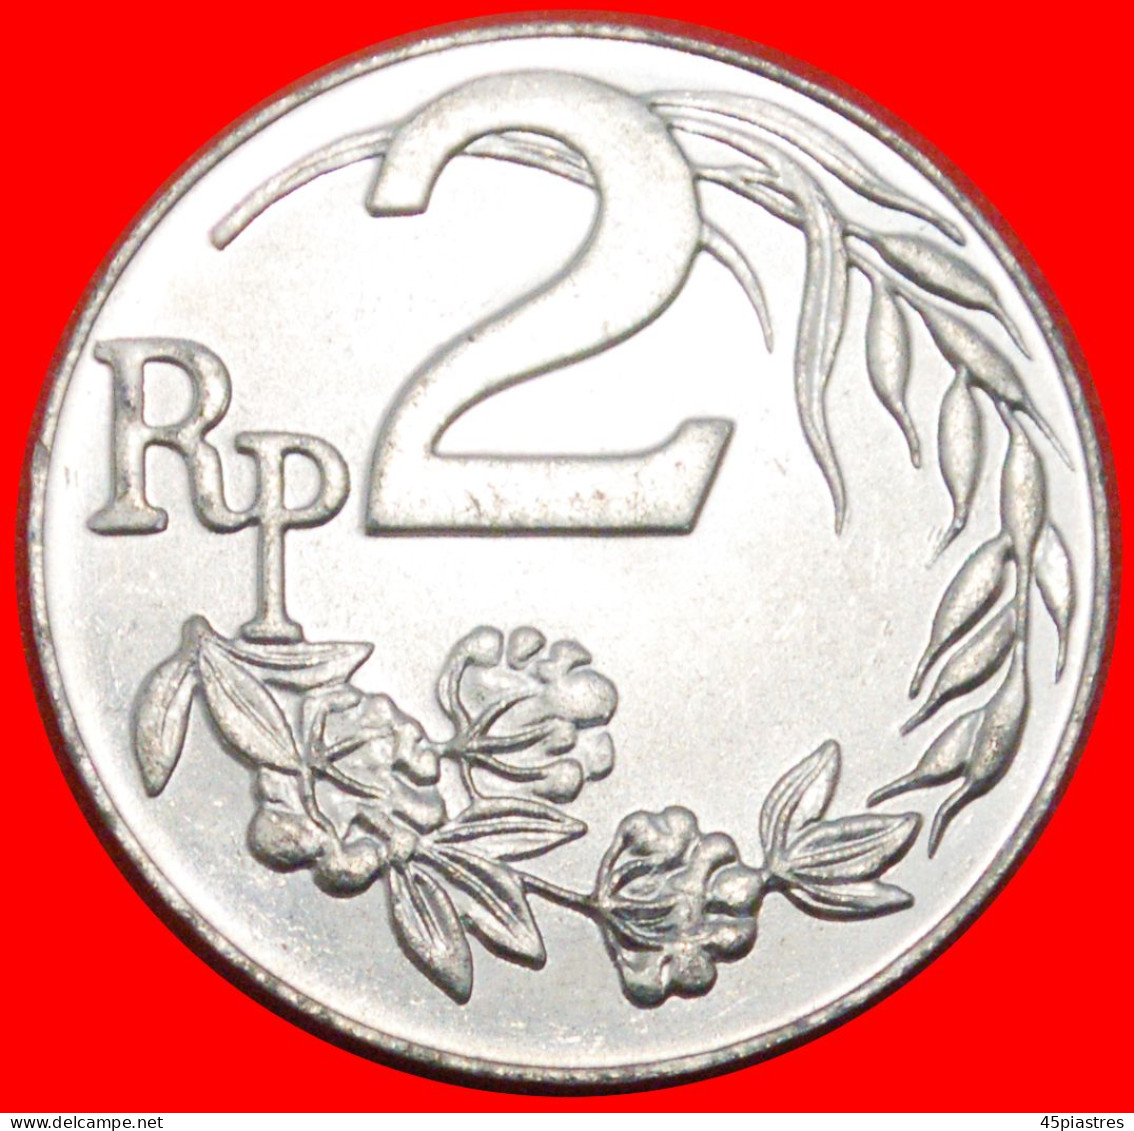 * RICE AND COTTON: INDONESIA  2 RUPIAH 1970 UNC MINT LUSTRE! · LOW START ·  NO RESERVE! - Indonesien